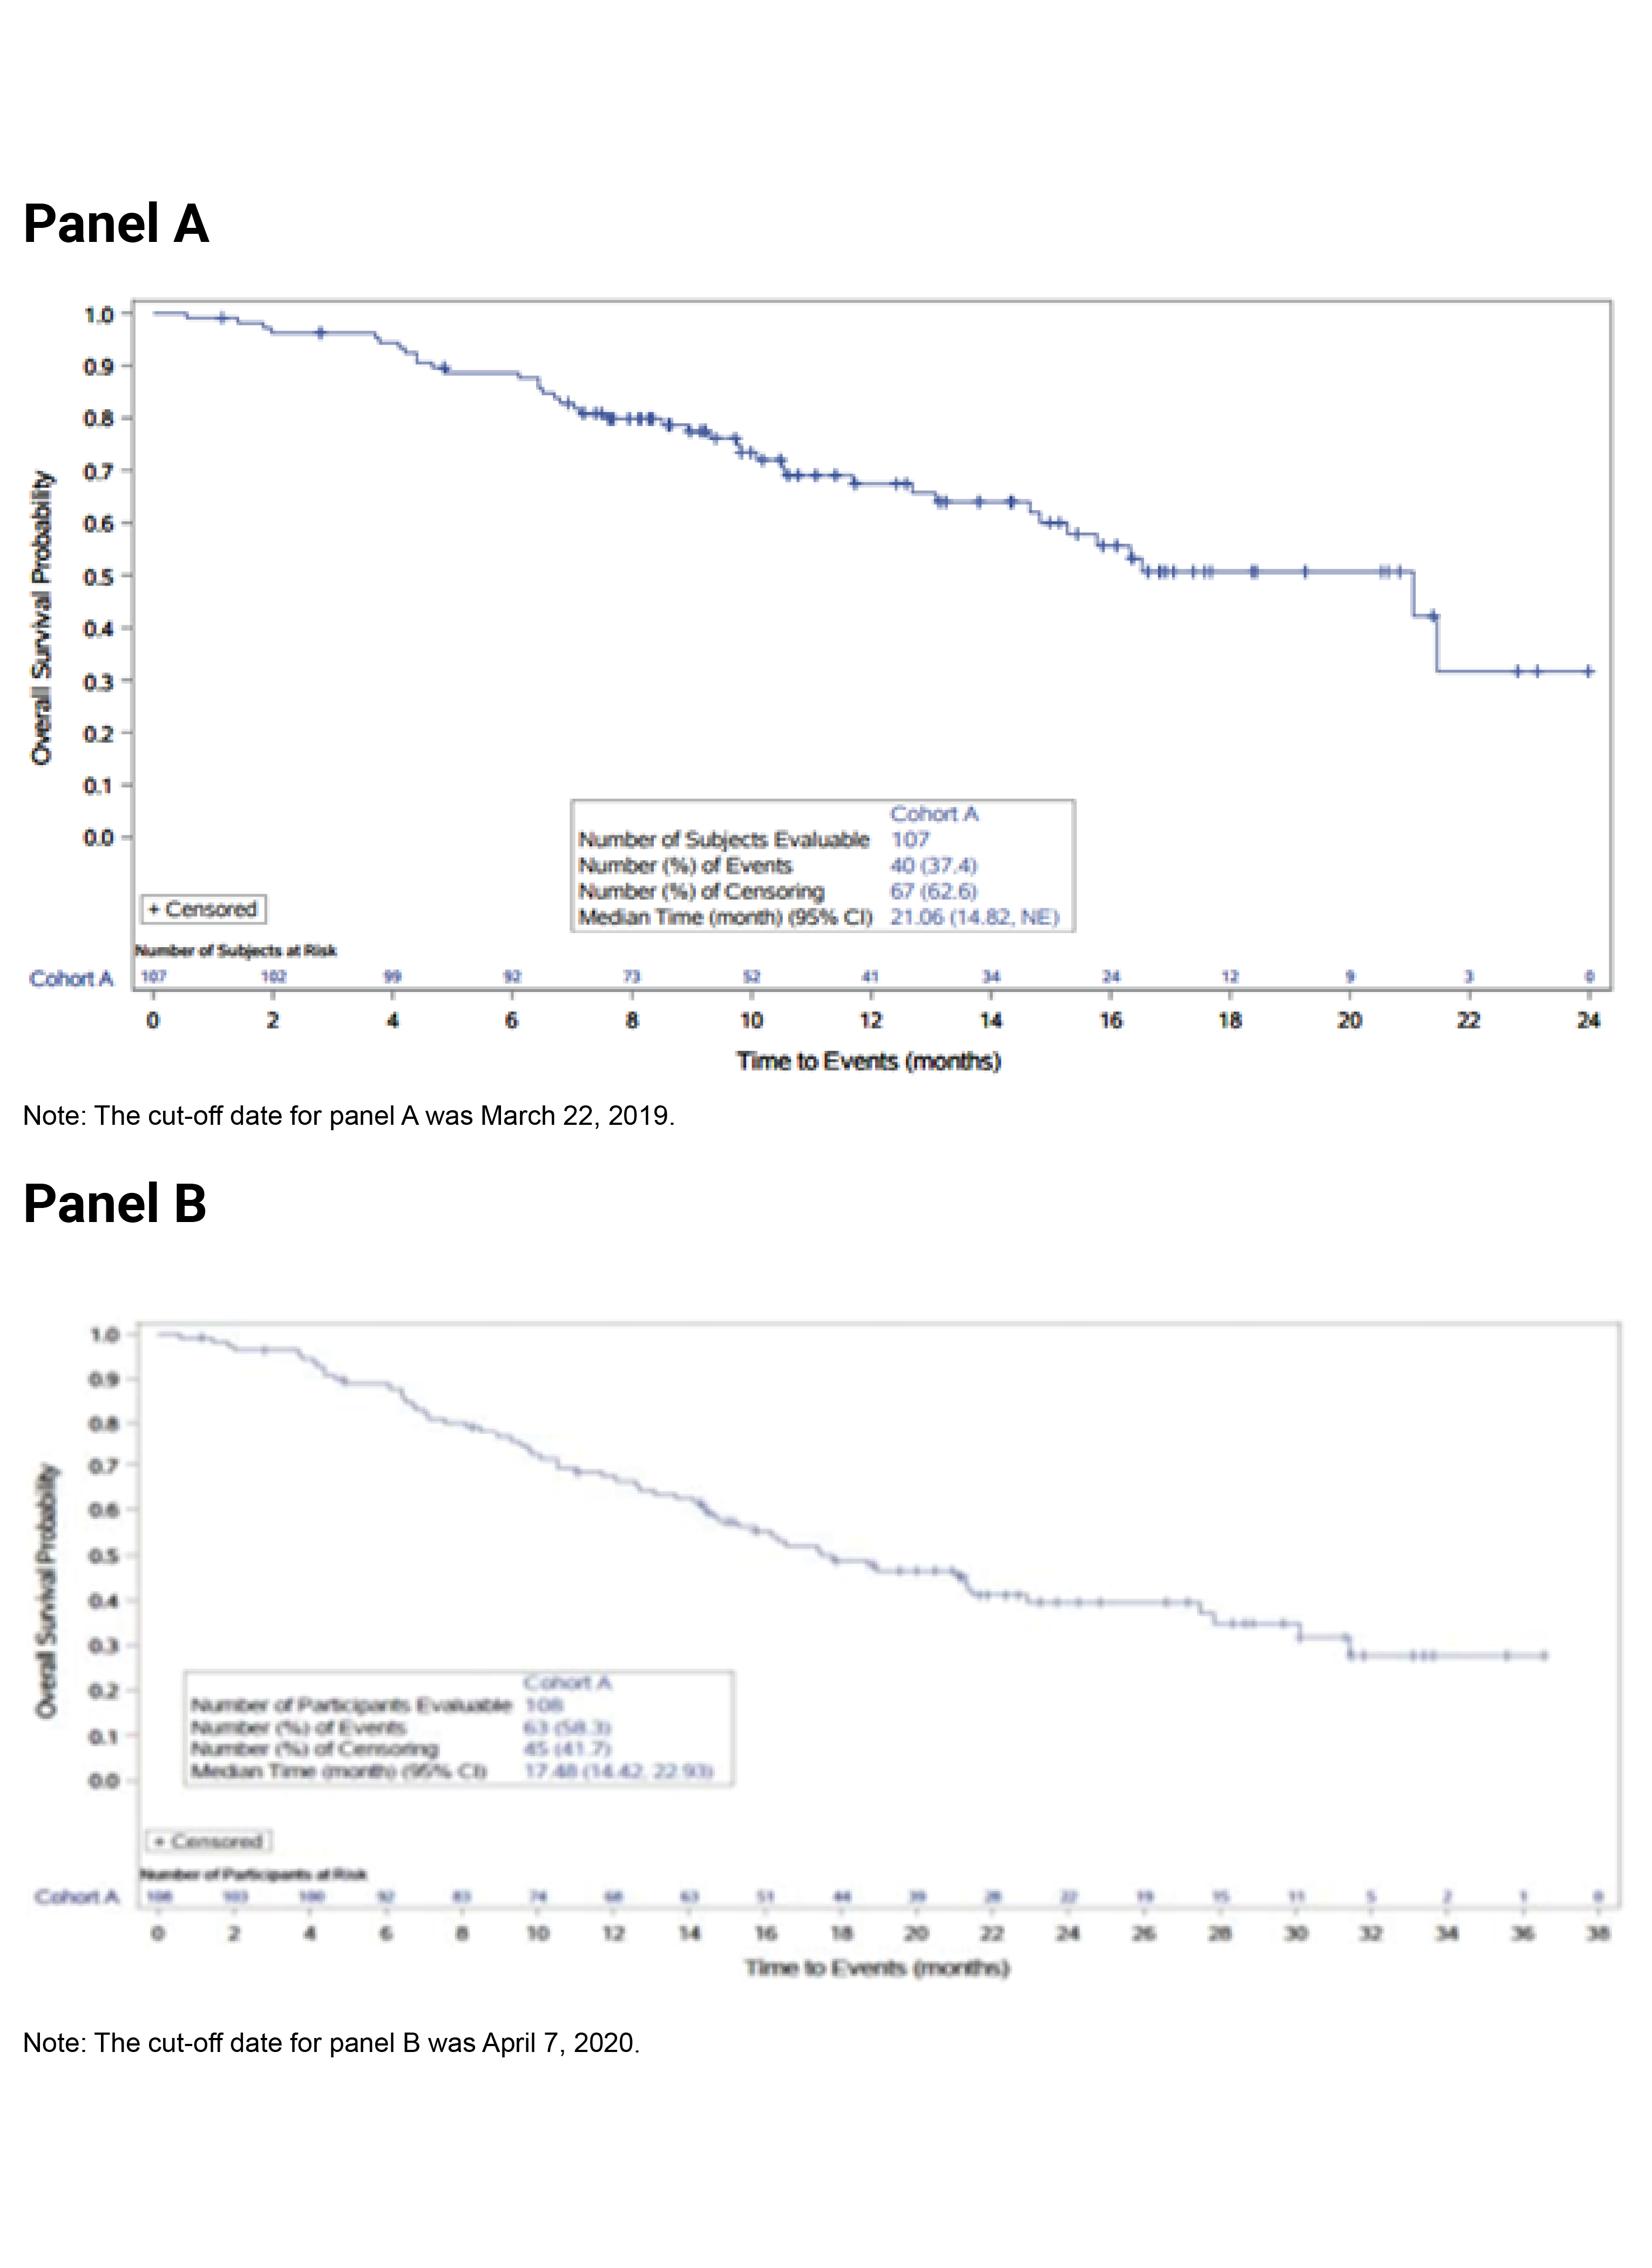 At the March 22, 2019, data cut-off date, the Kaplan–Meier curve of OS for patients in Cohort A of the FIGHT-202 trial decreased over time. The slope of the curve was overall gentle. The curve ended at 24 months. At the April 7, 2020 data cut-off date, the Kaplan–Meier curve of OS for patients in Cohort A of the FIGHT-202 trial decreased over time with a gentle slope throughout. The curve ended at approximately 37 months. The curve plateaued between approximately month 21 and month 25 and months 31 and 37.